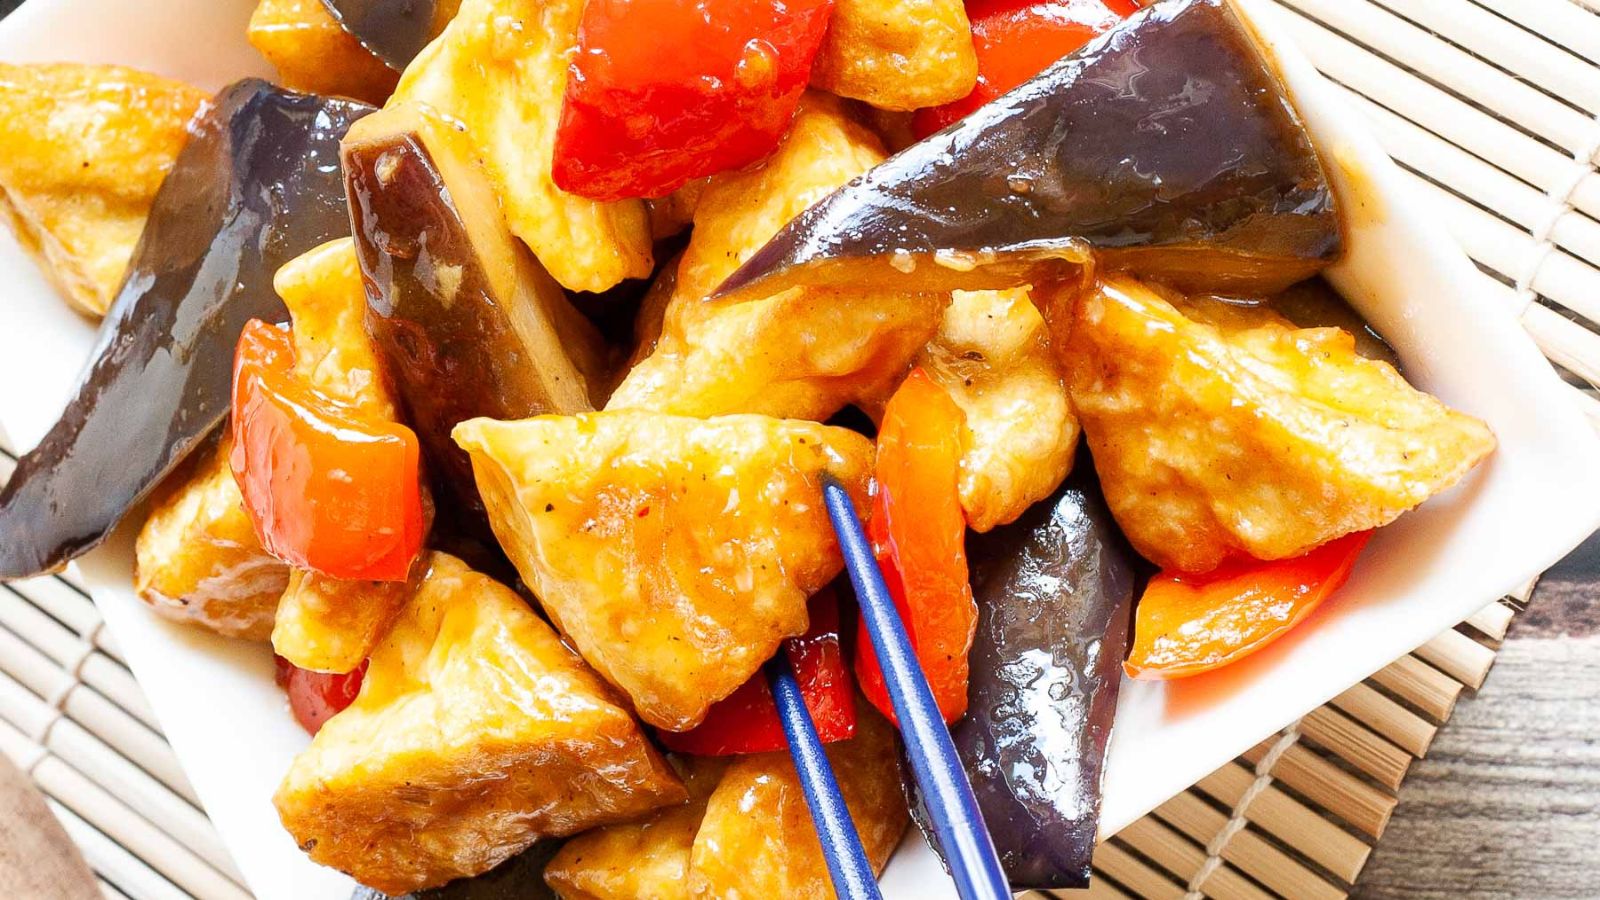 <p>Have you always loved eggplant tofu, but Panda Express doesn’t serve it near your location anymore, or if you always wanted to try it but never had a chance? Fry up your skillet now and make this tofu, eggplant, and bell pepper dish stir-fried in a sweet and spicy sauce.</p> <p><strong>Recipe: <a href="https://mypureplants.com/panda-express-eggplant-tofu/">panda express eggplant tofu</a></strong></p>